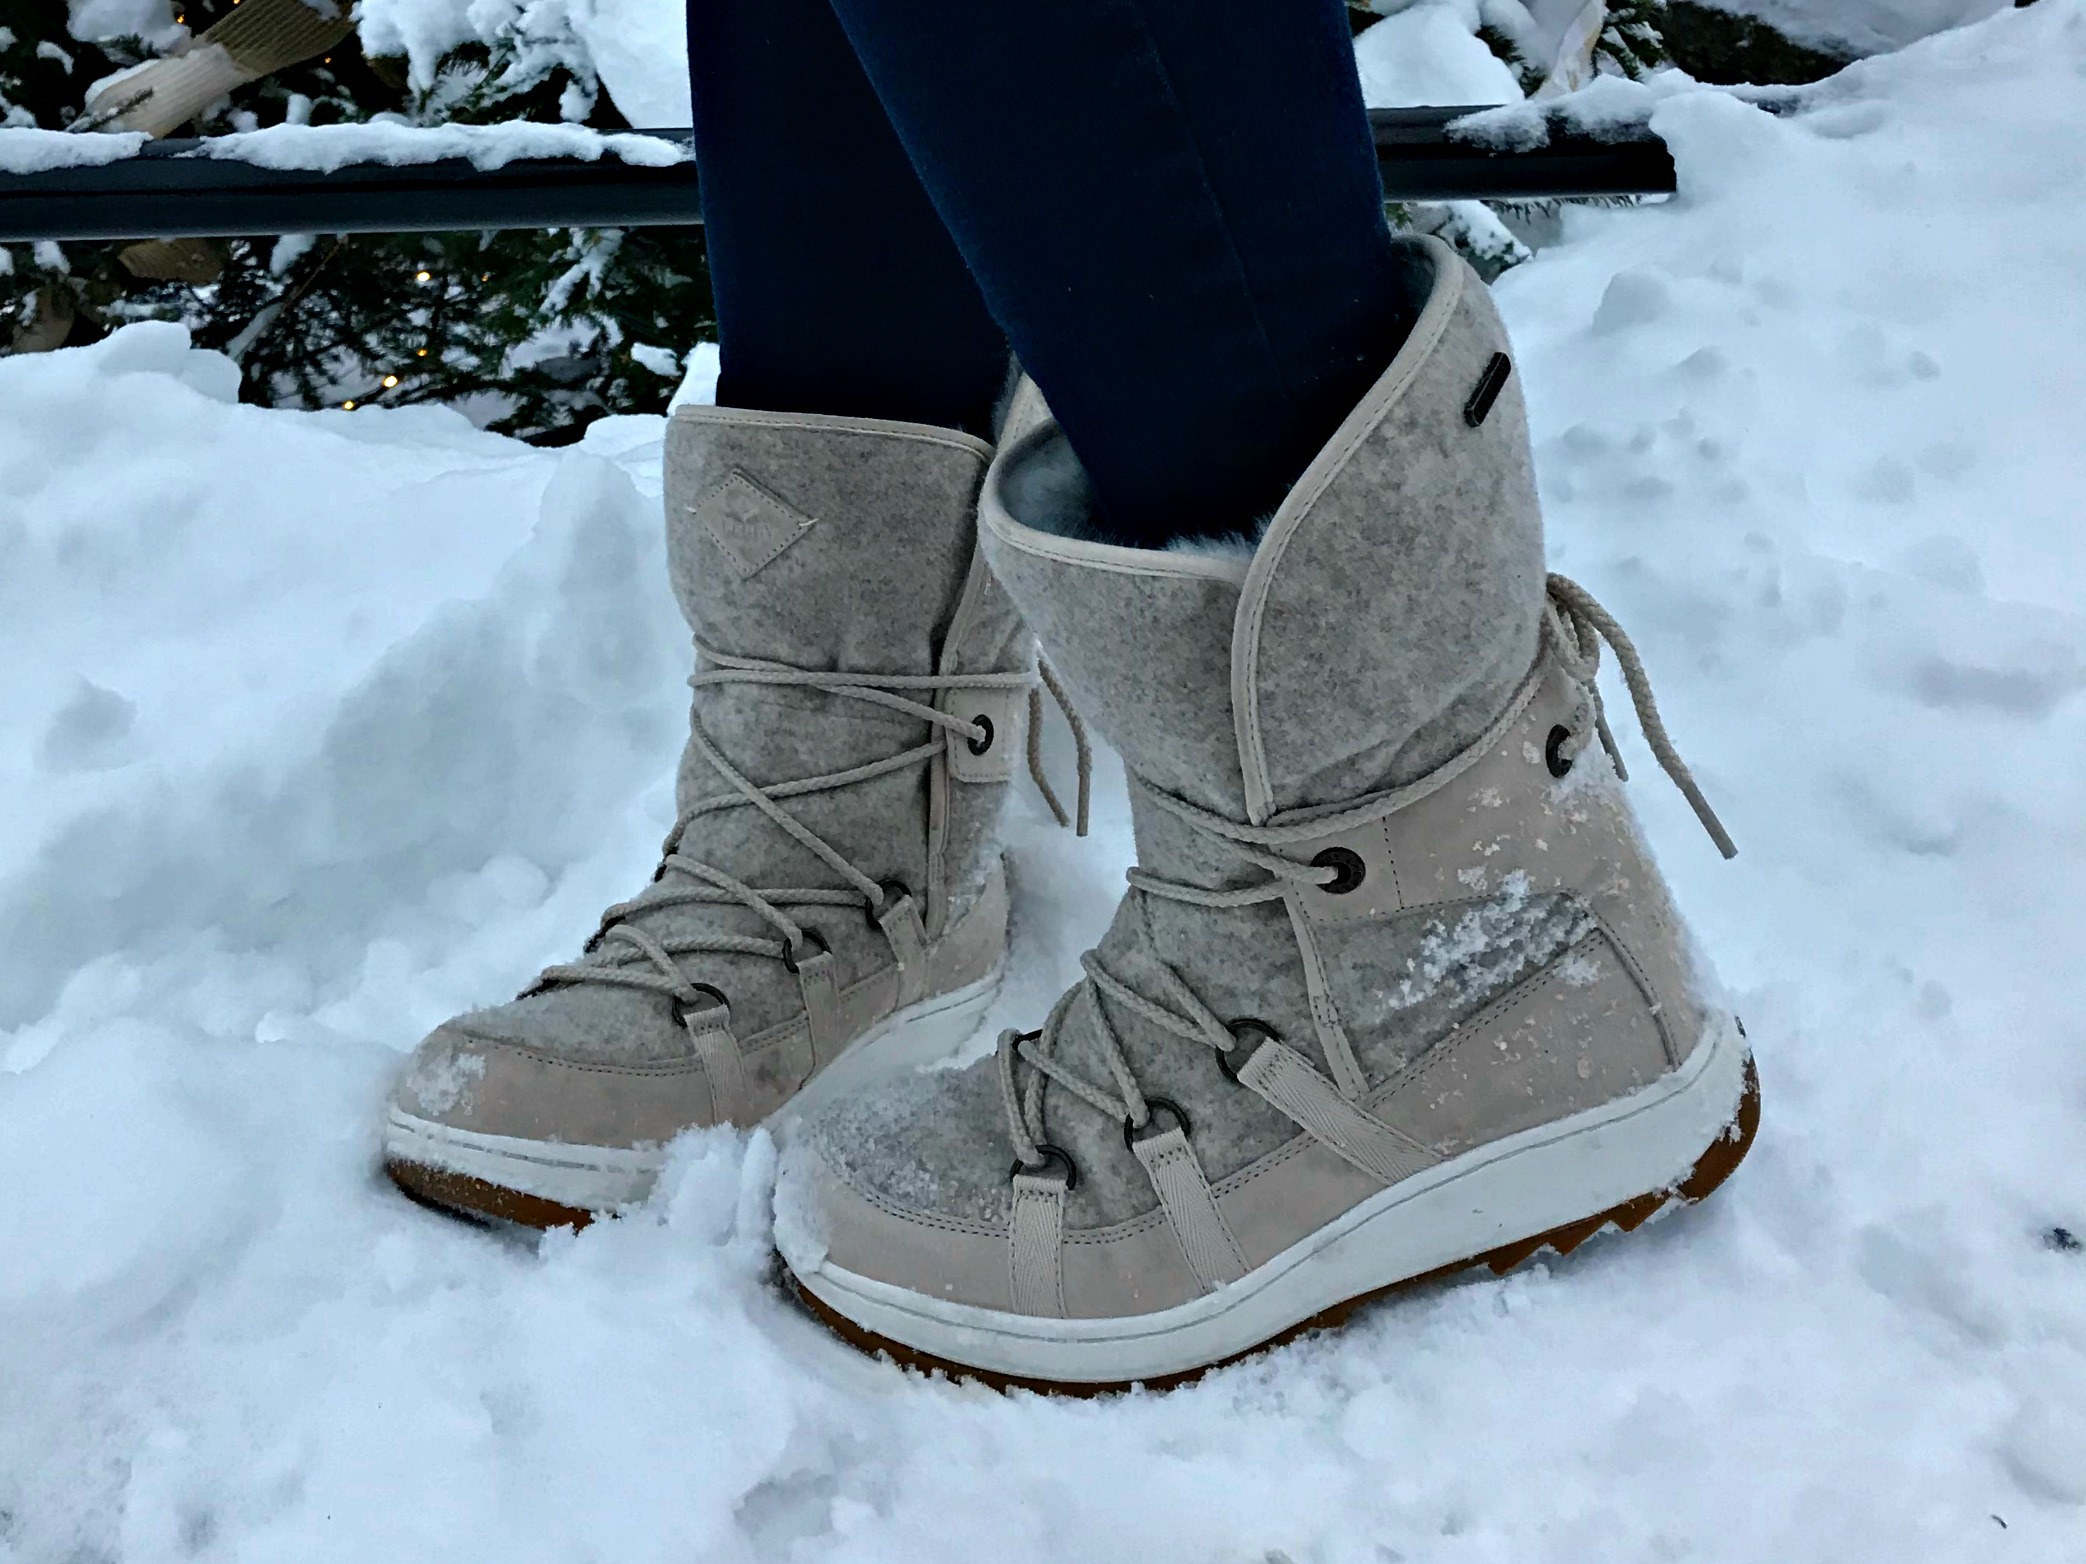 Slip resistant boots review